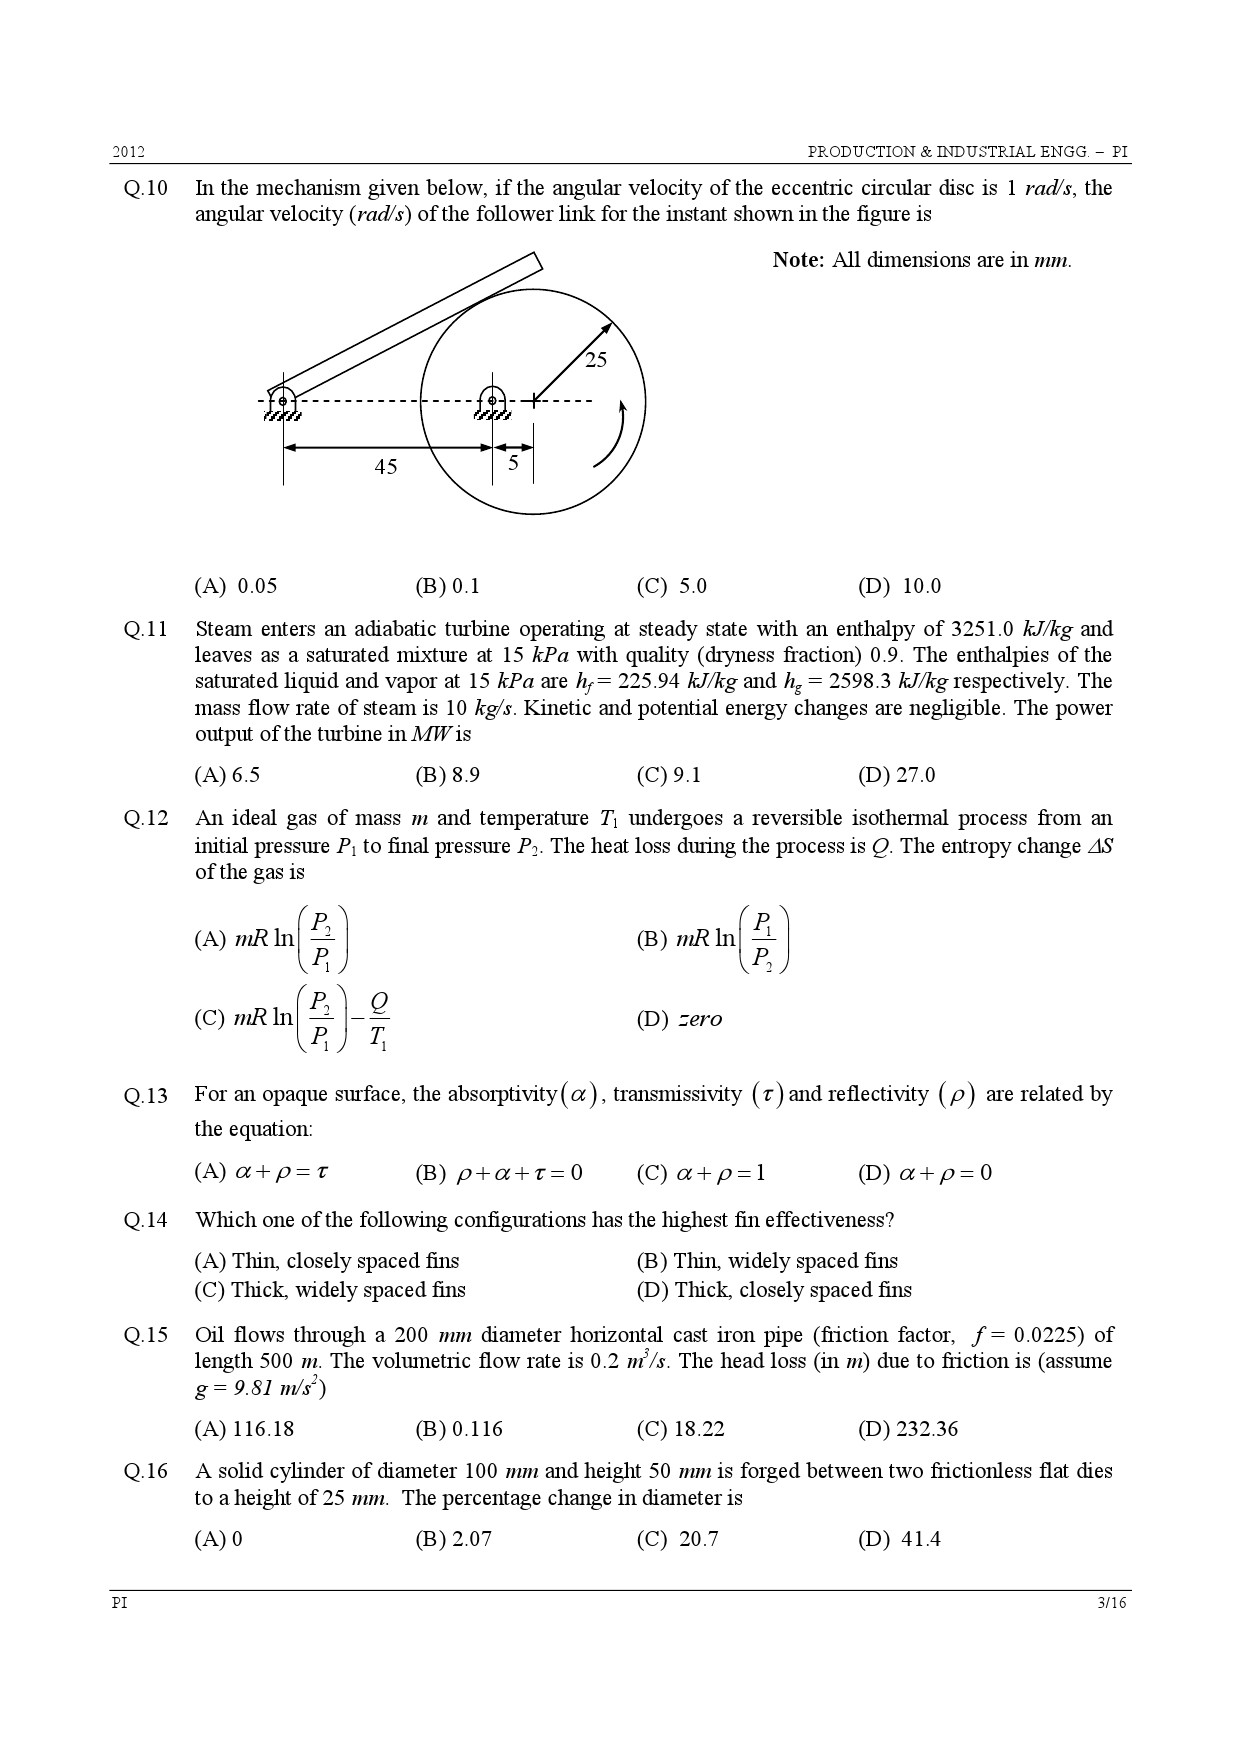 GATE Exam Question Paper 2012 Production and Industrial Engineering 3